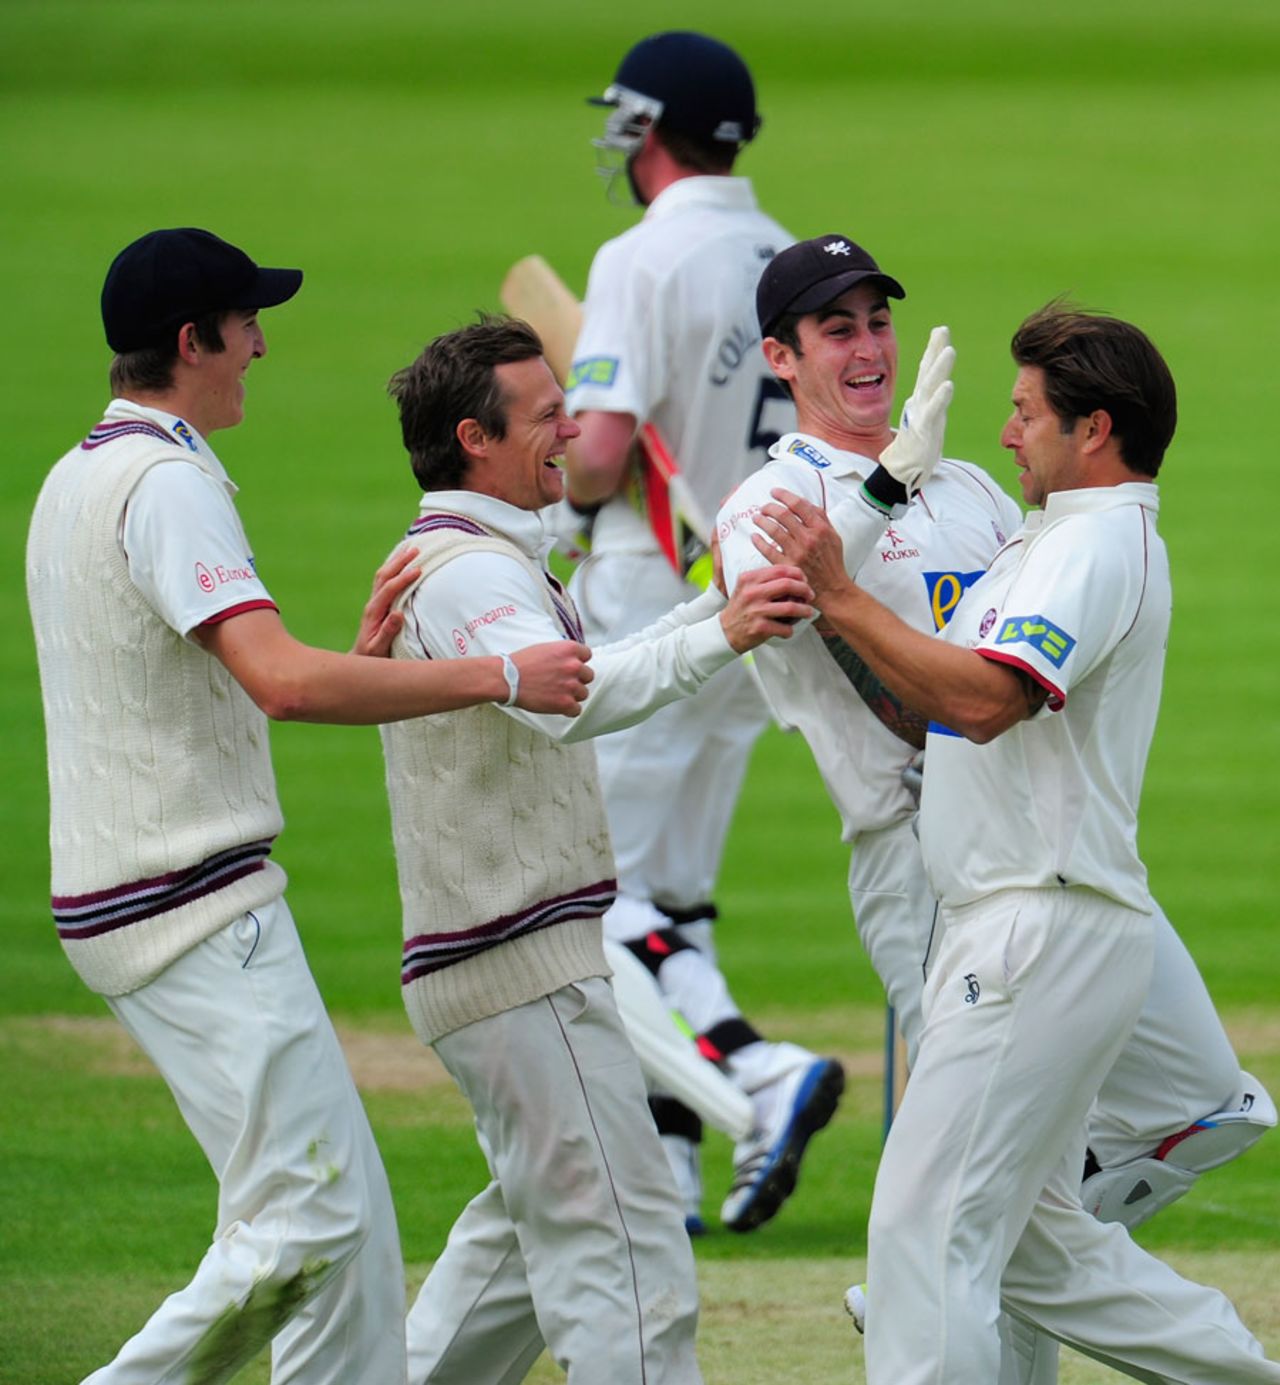 Peter Trego celebrates with his team-mates after dismissing Paul Collingwood, Durham v Somerset, County Championship, Division One, 1st day, Chester-le-Street, May 9, 2012